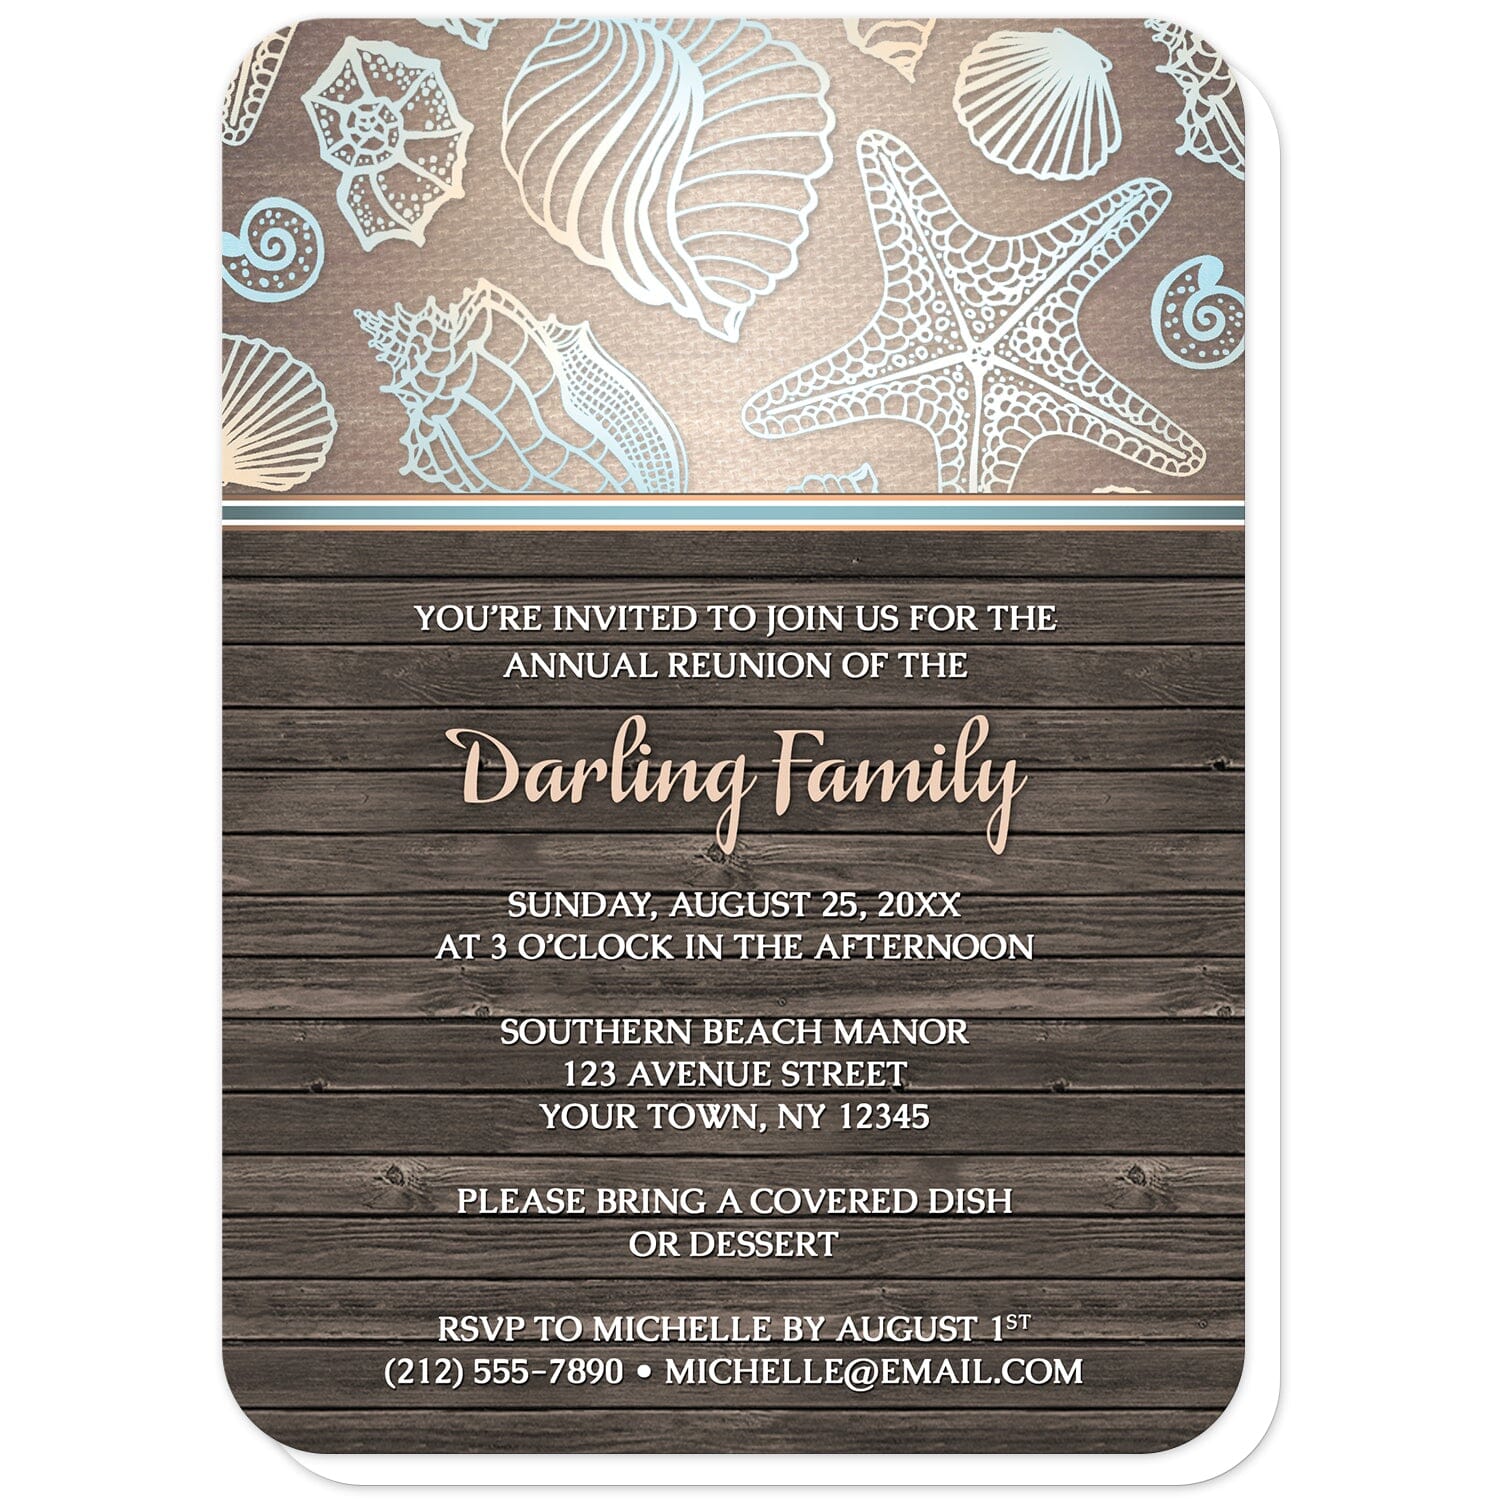 Rustic Wood Beach Seashell Family Reunion Invitations (with rounded corners) at Artistically Invited. Rustic wood beach seashell family reunion invitations with a blue, orange, and white seashell outline pattern over a gradient sandy canvas texture illustration at the top. Your personalized reunion celebration details are custom printed in white and light orange over a brown wood background below the seashells.